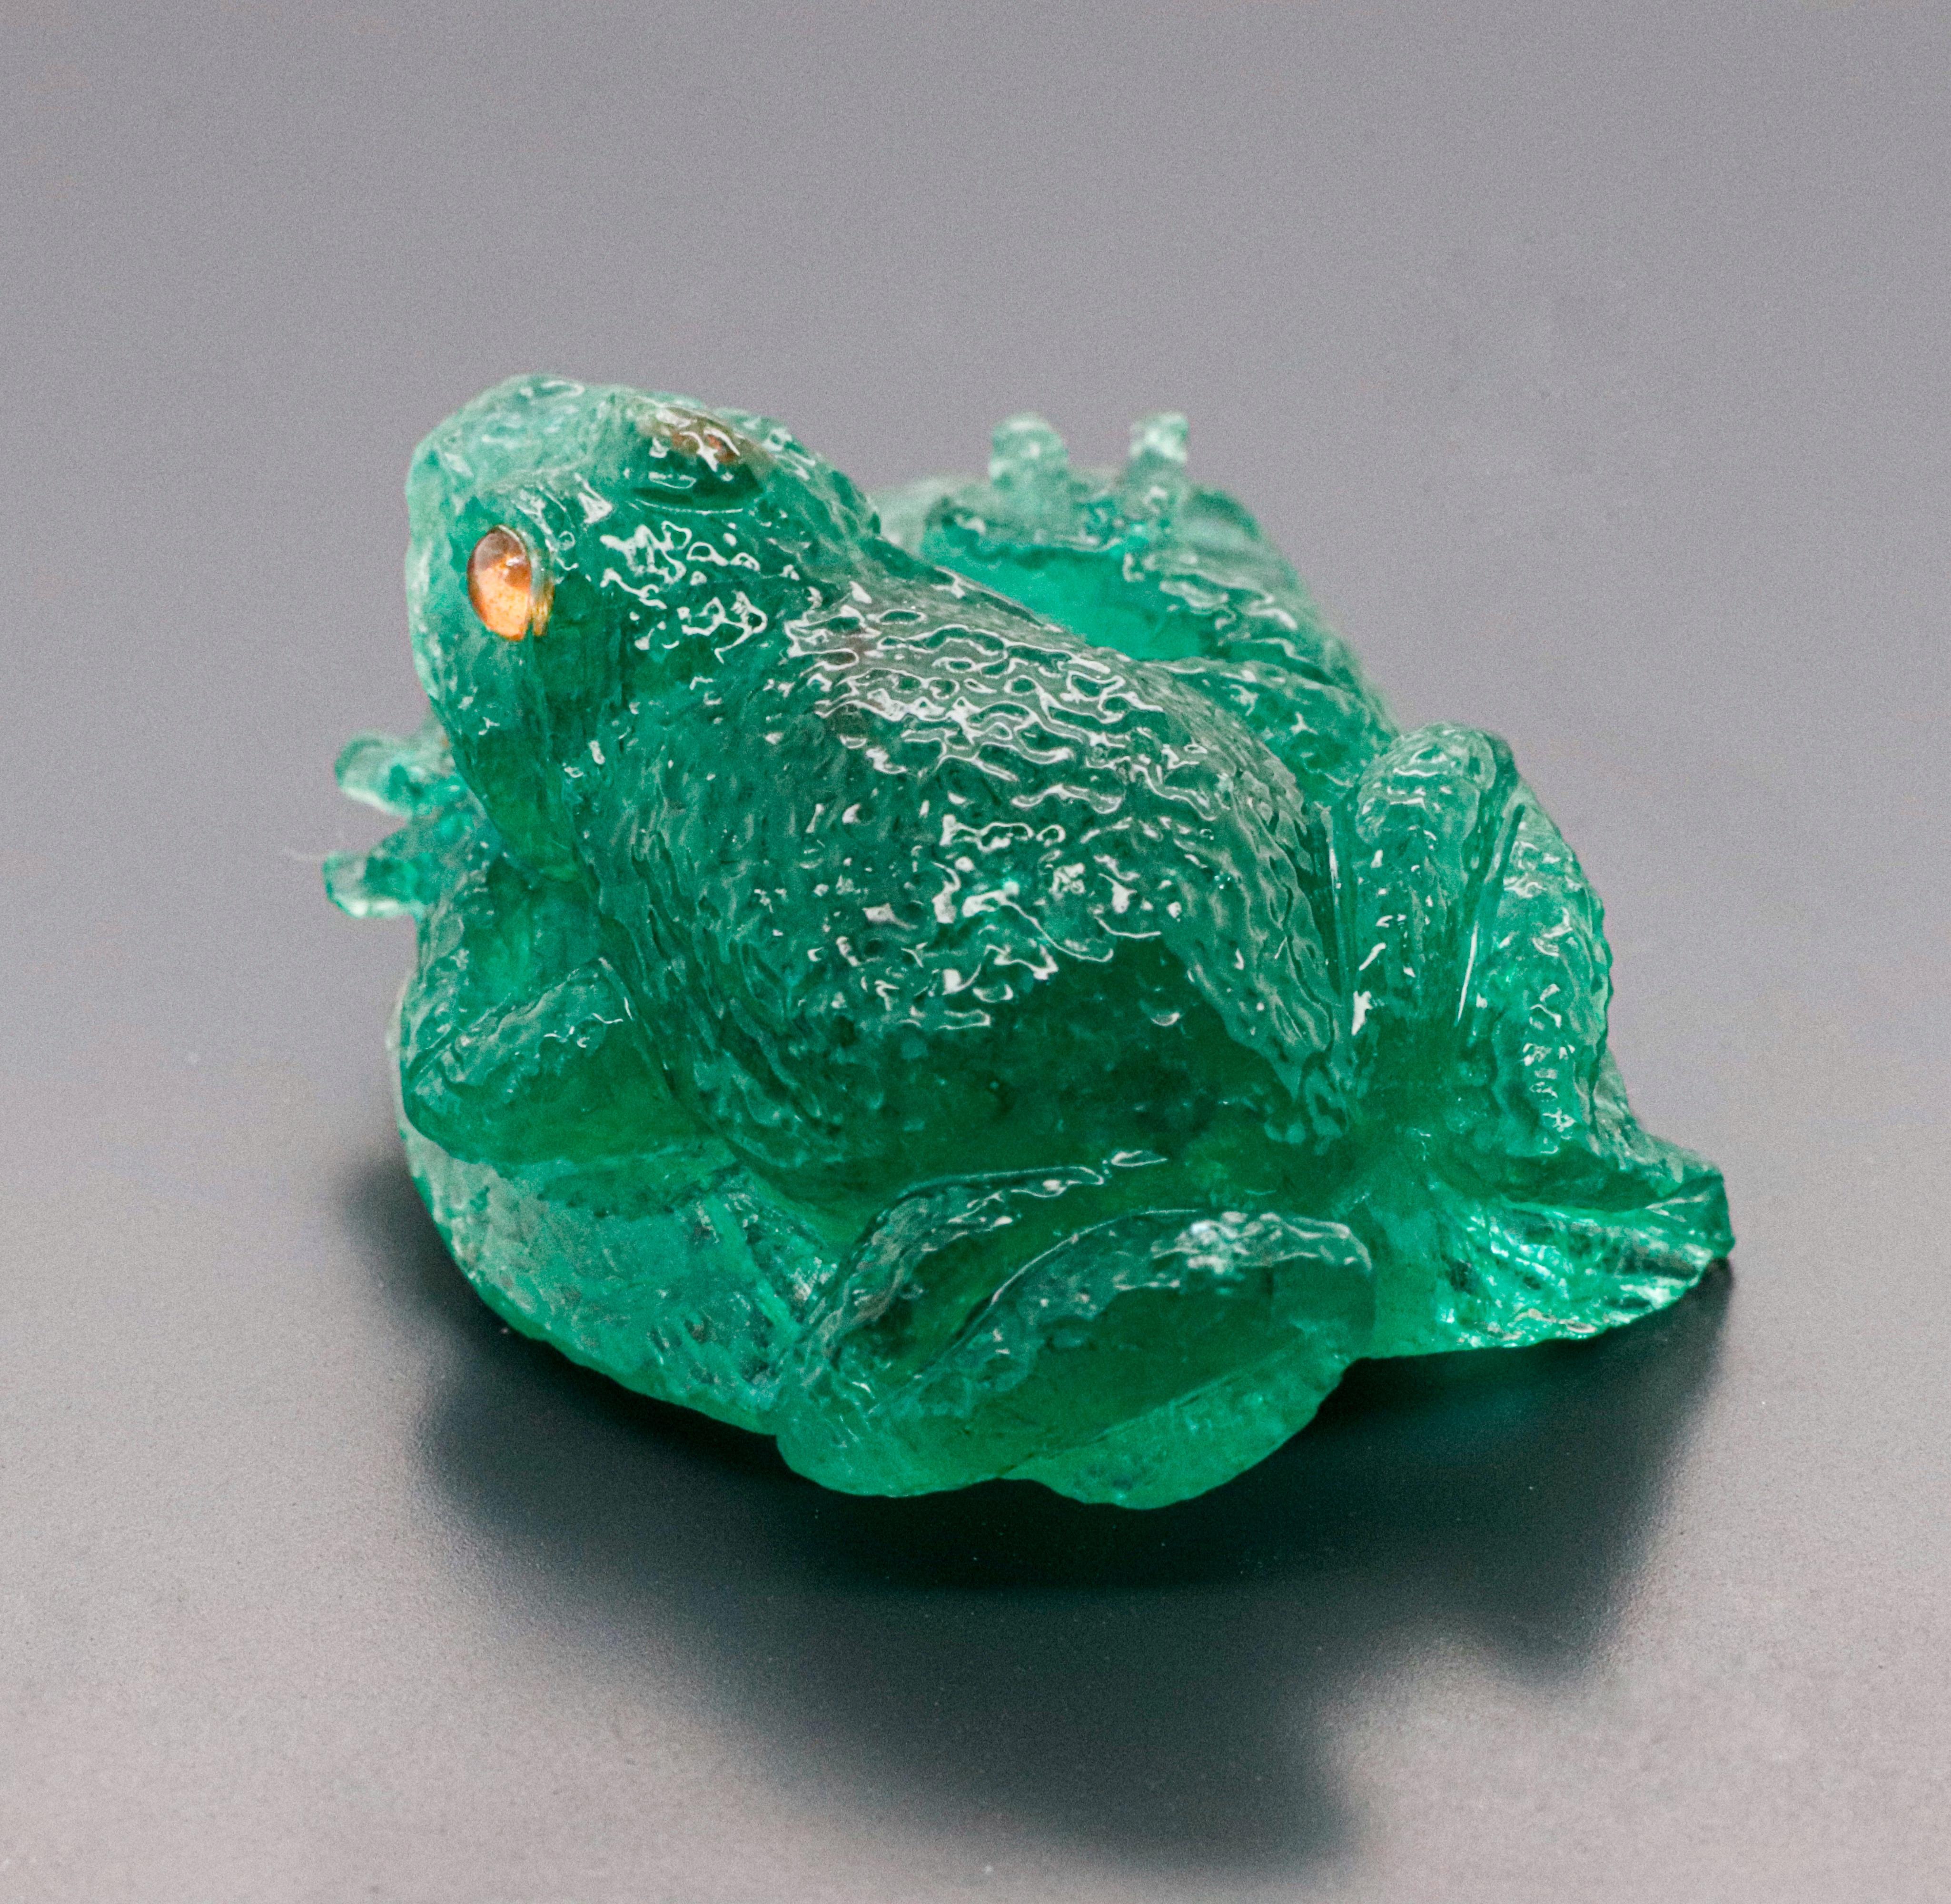 Artisan 14.87 Ct Emerald Green Carving Frog For Sale